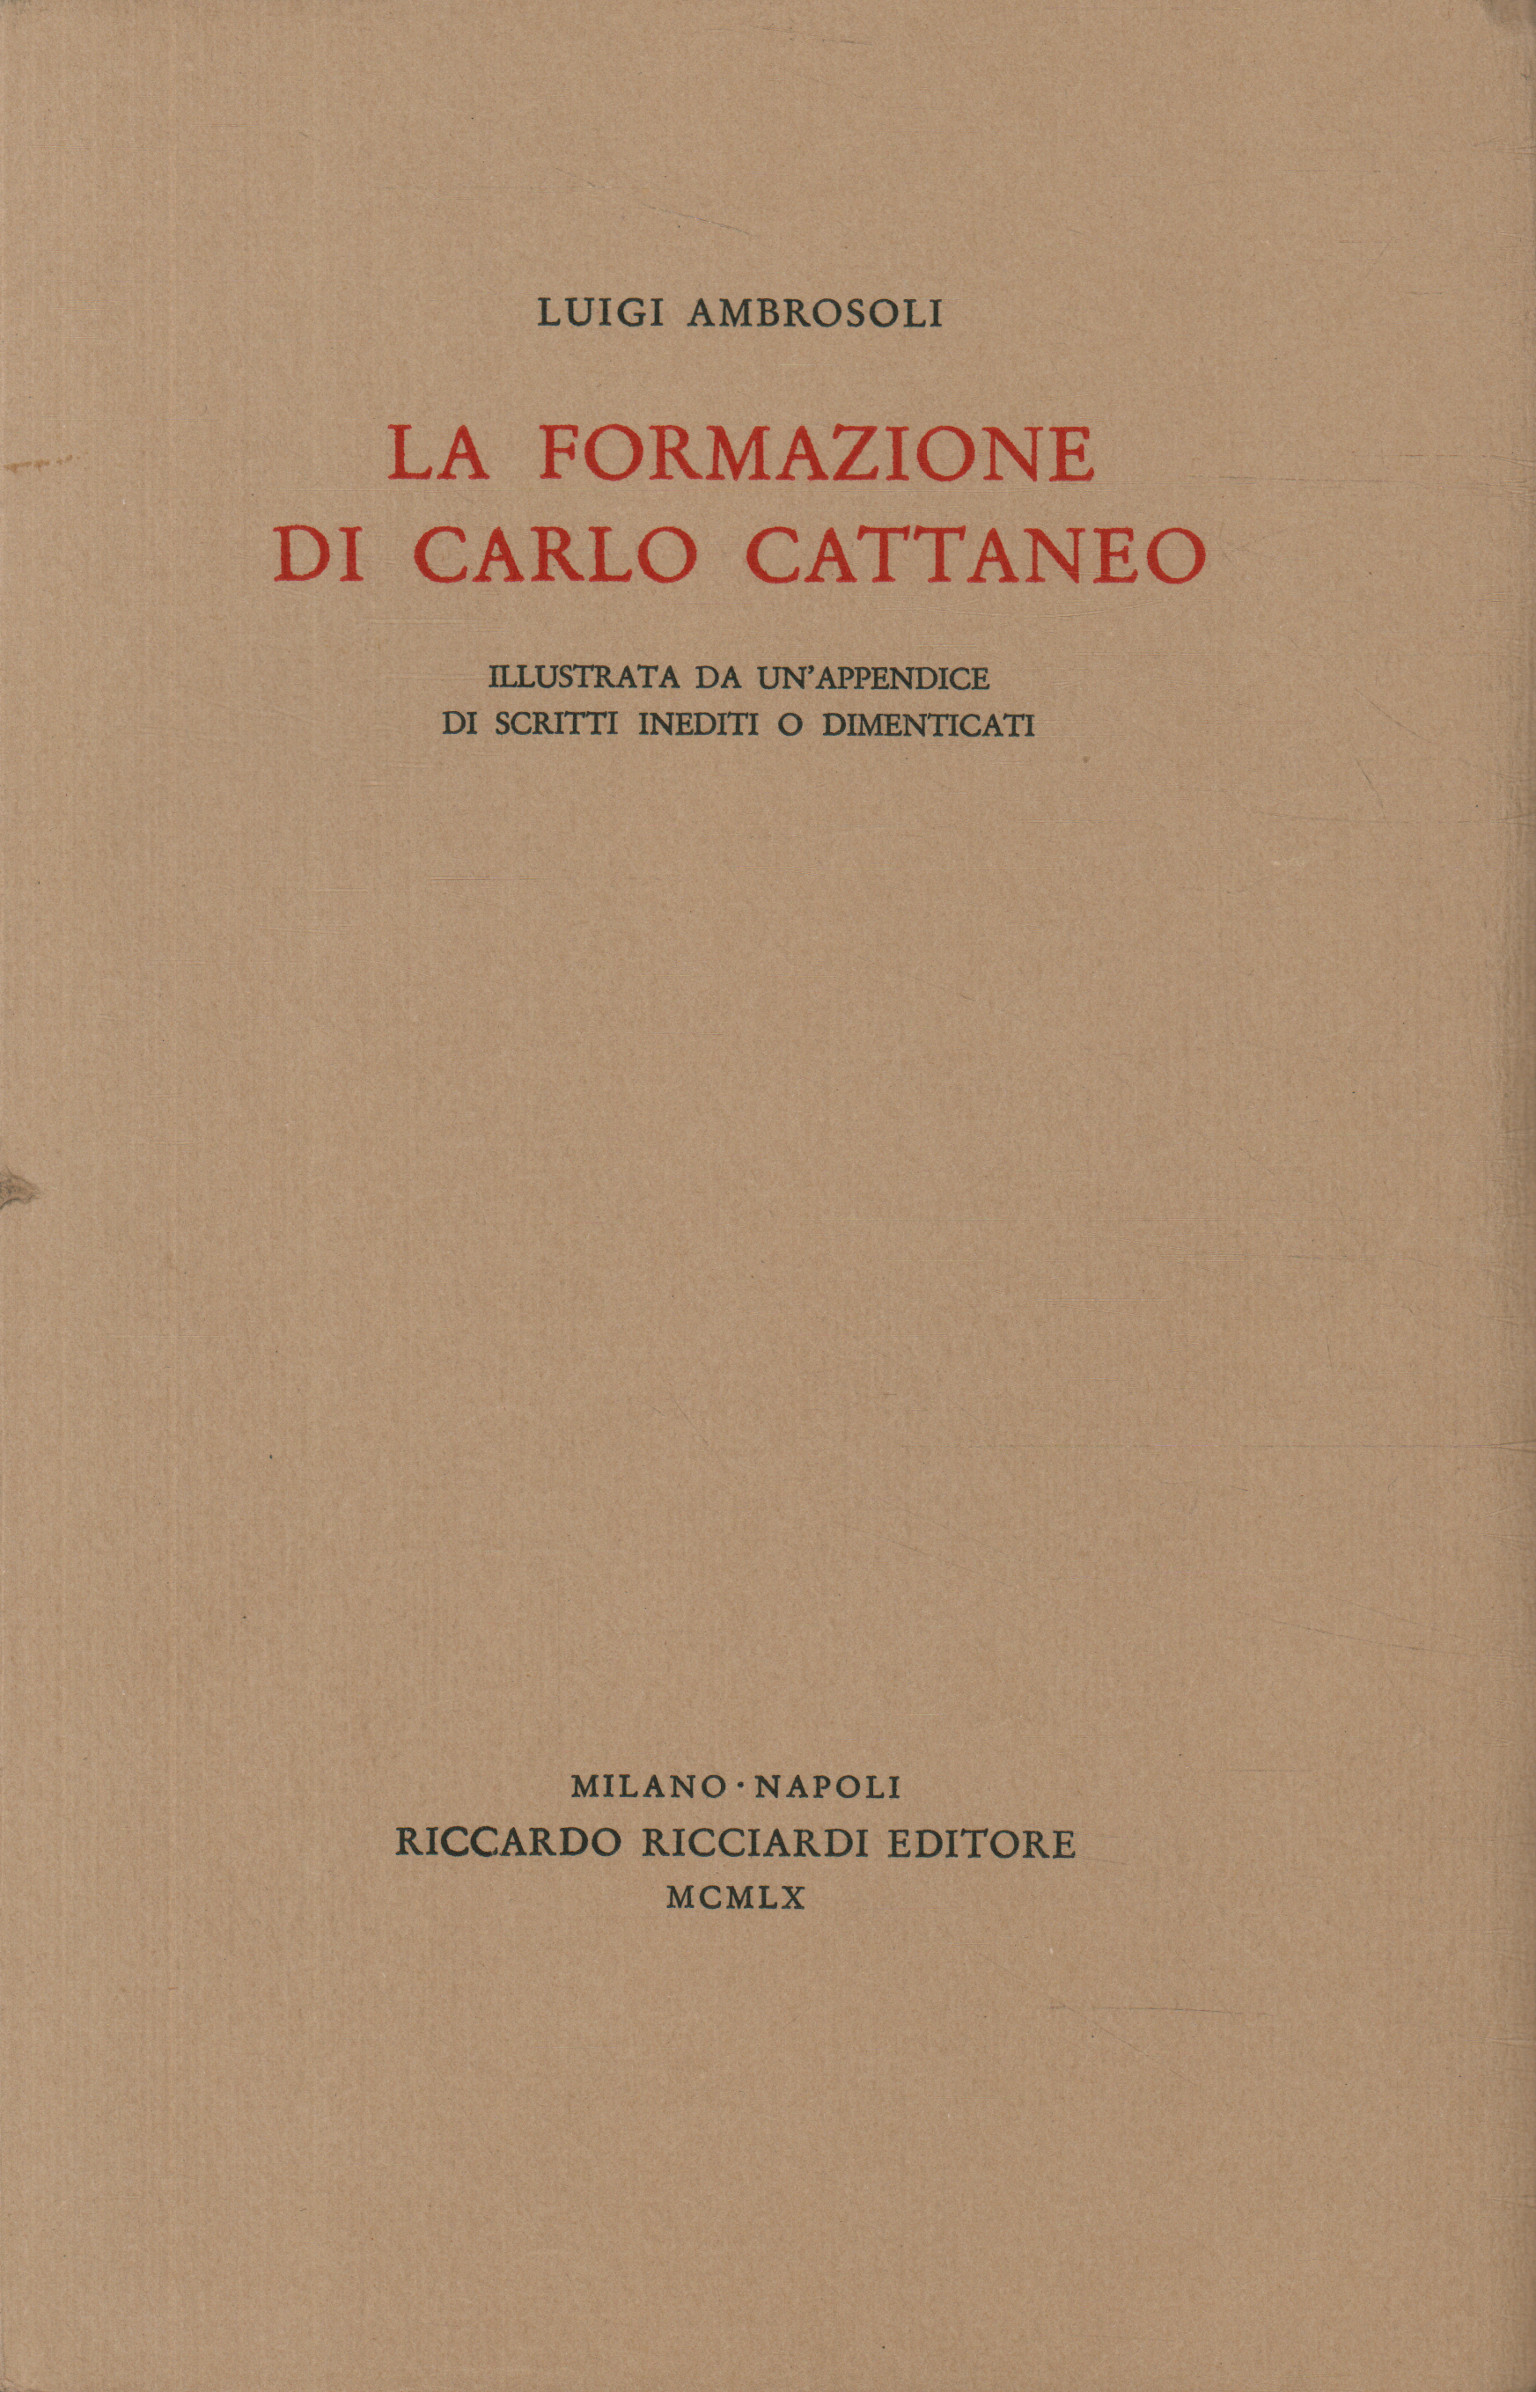 The training of Carlo Cattaneo